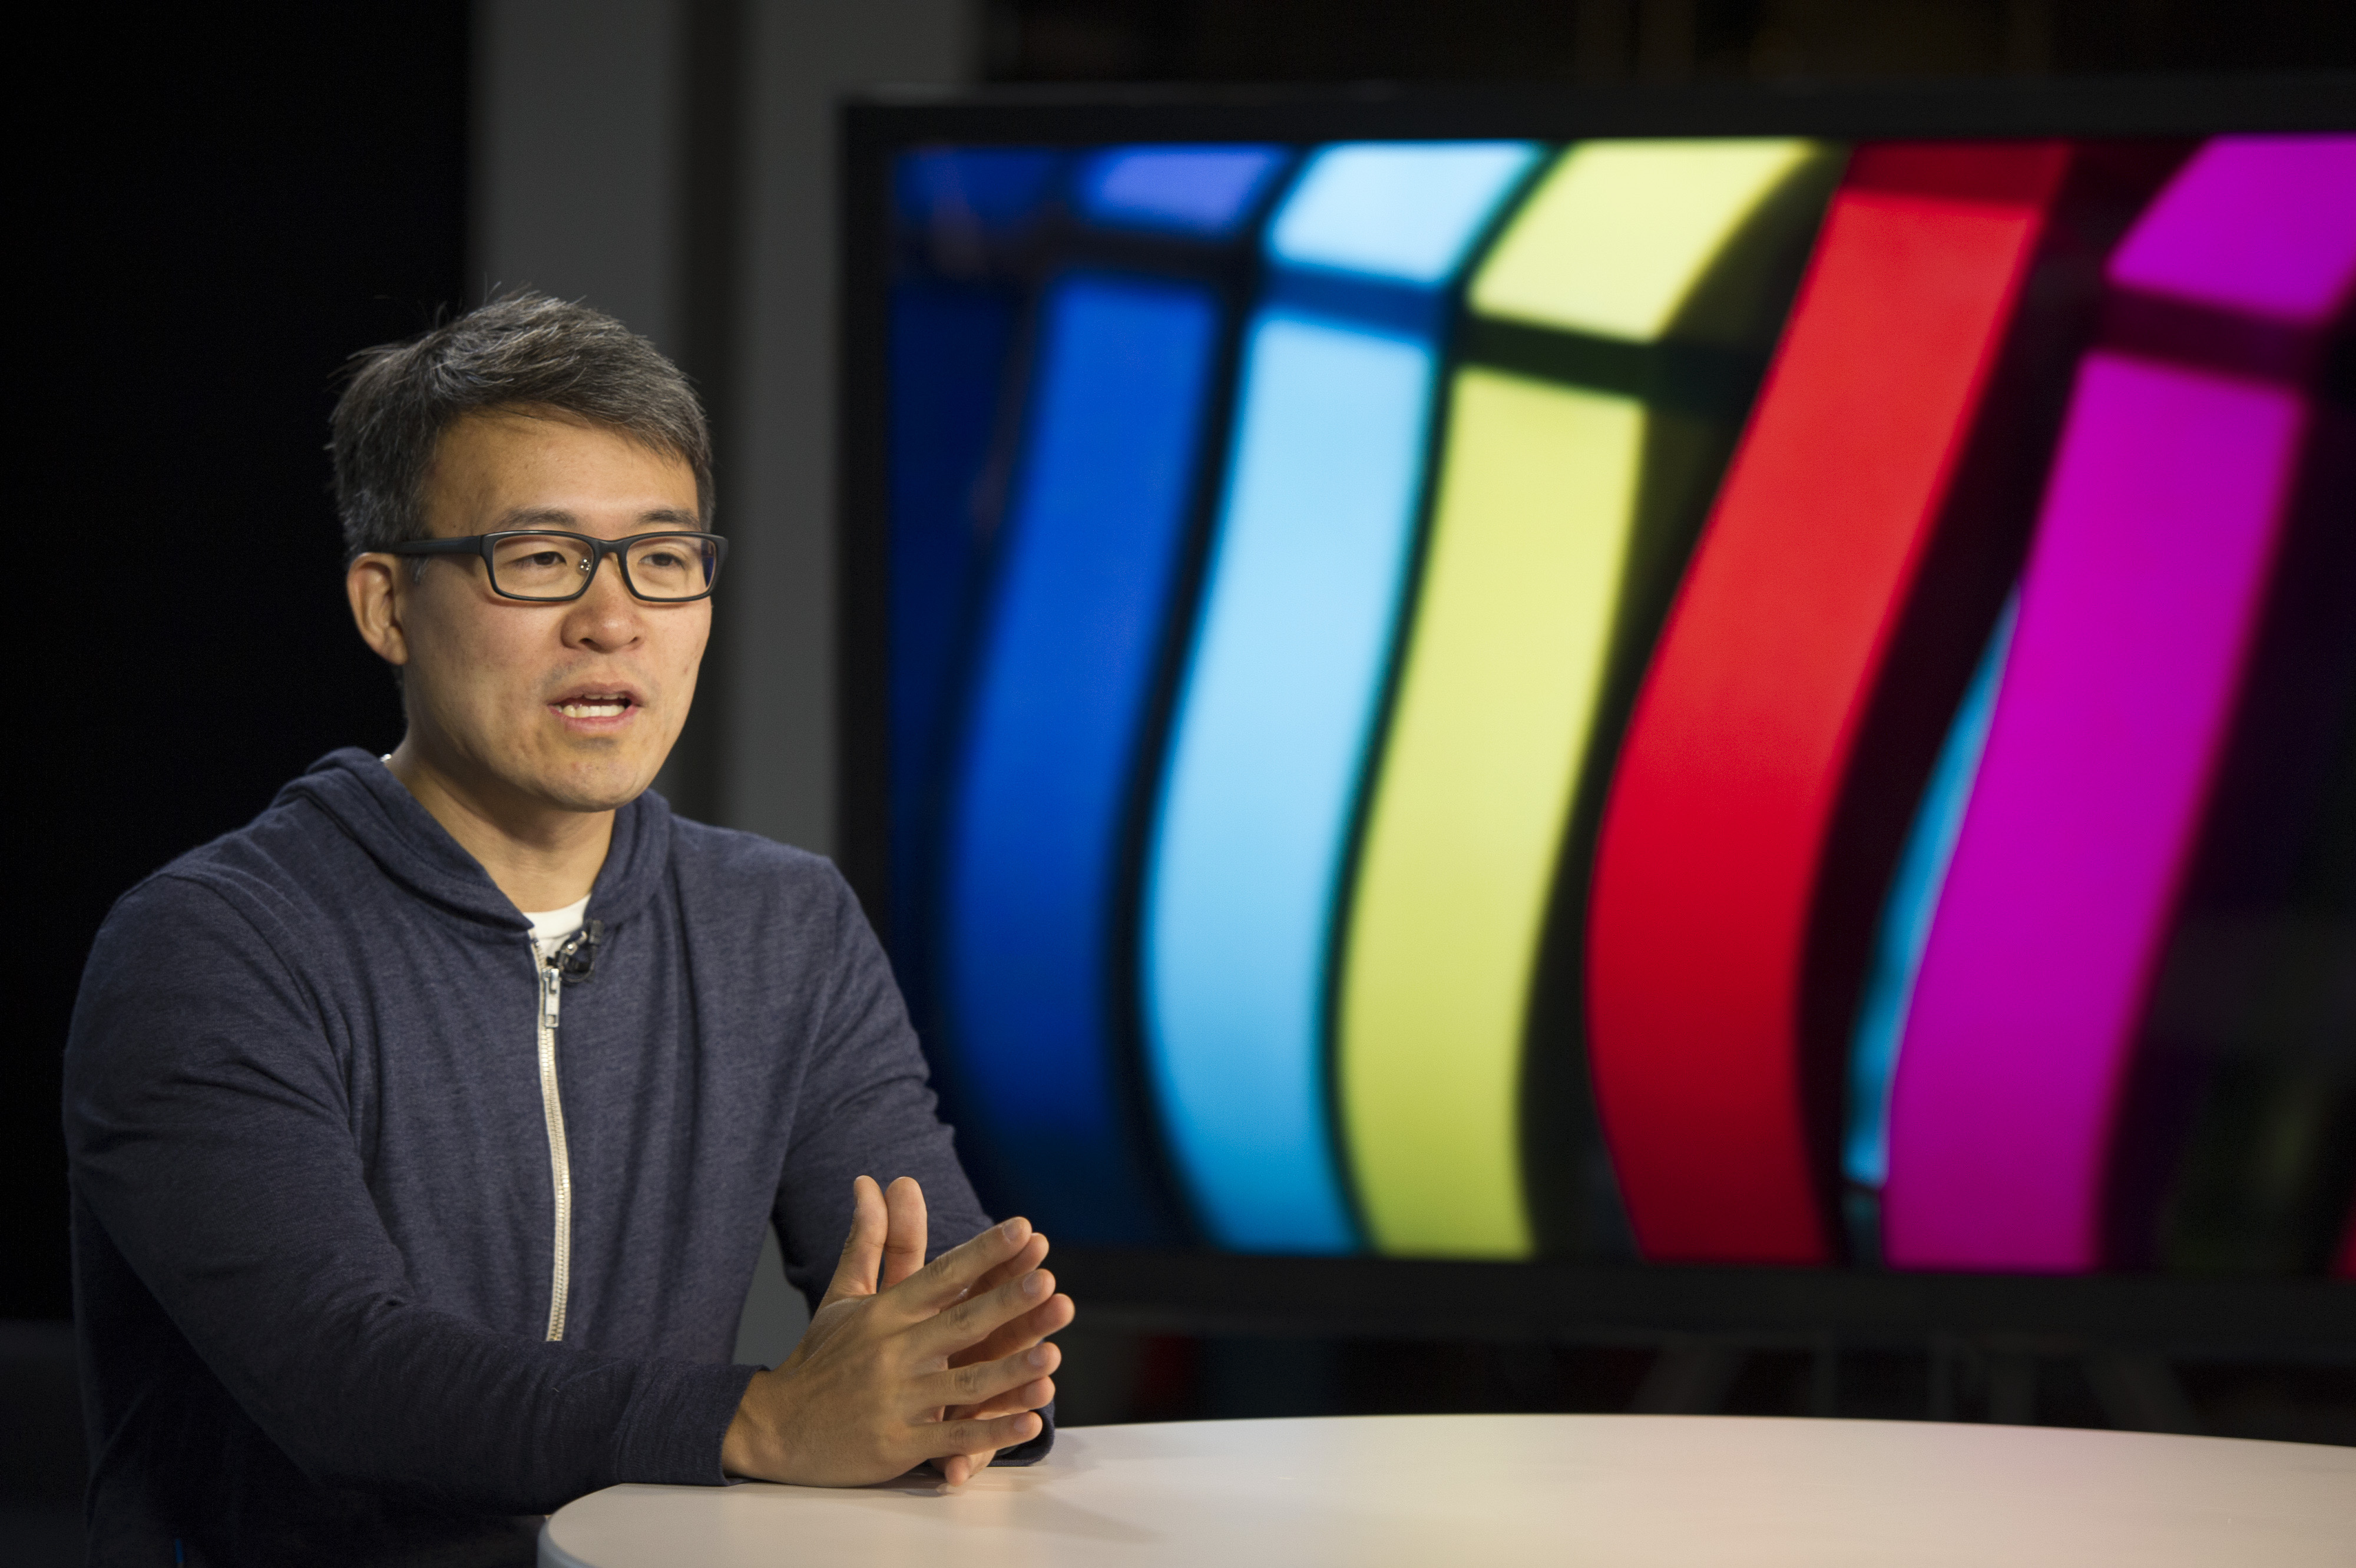 James Park, co-founder and chief executive officer of Fitbit Inc., speaks during a Bloomberg Television interview in San Francisco, California, U.S., on Friday, Aug. 22, 2014. (Bloomberg—Bloomberg via Getty Images)